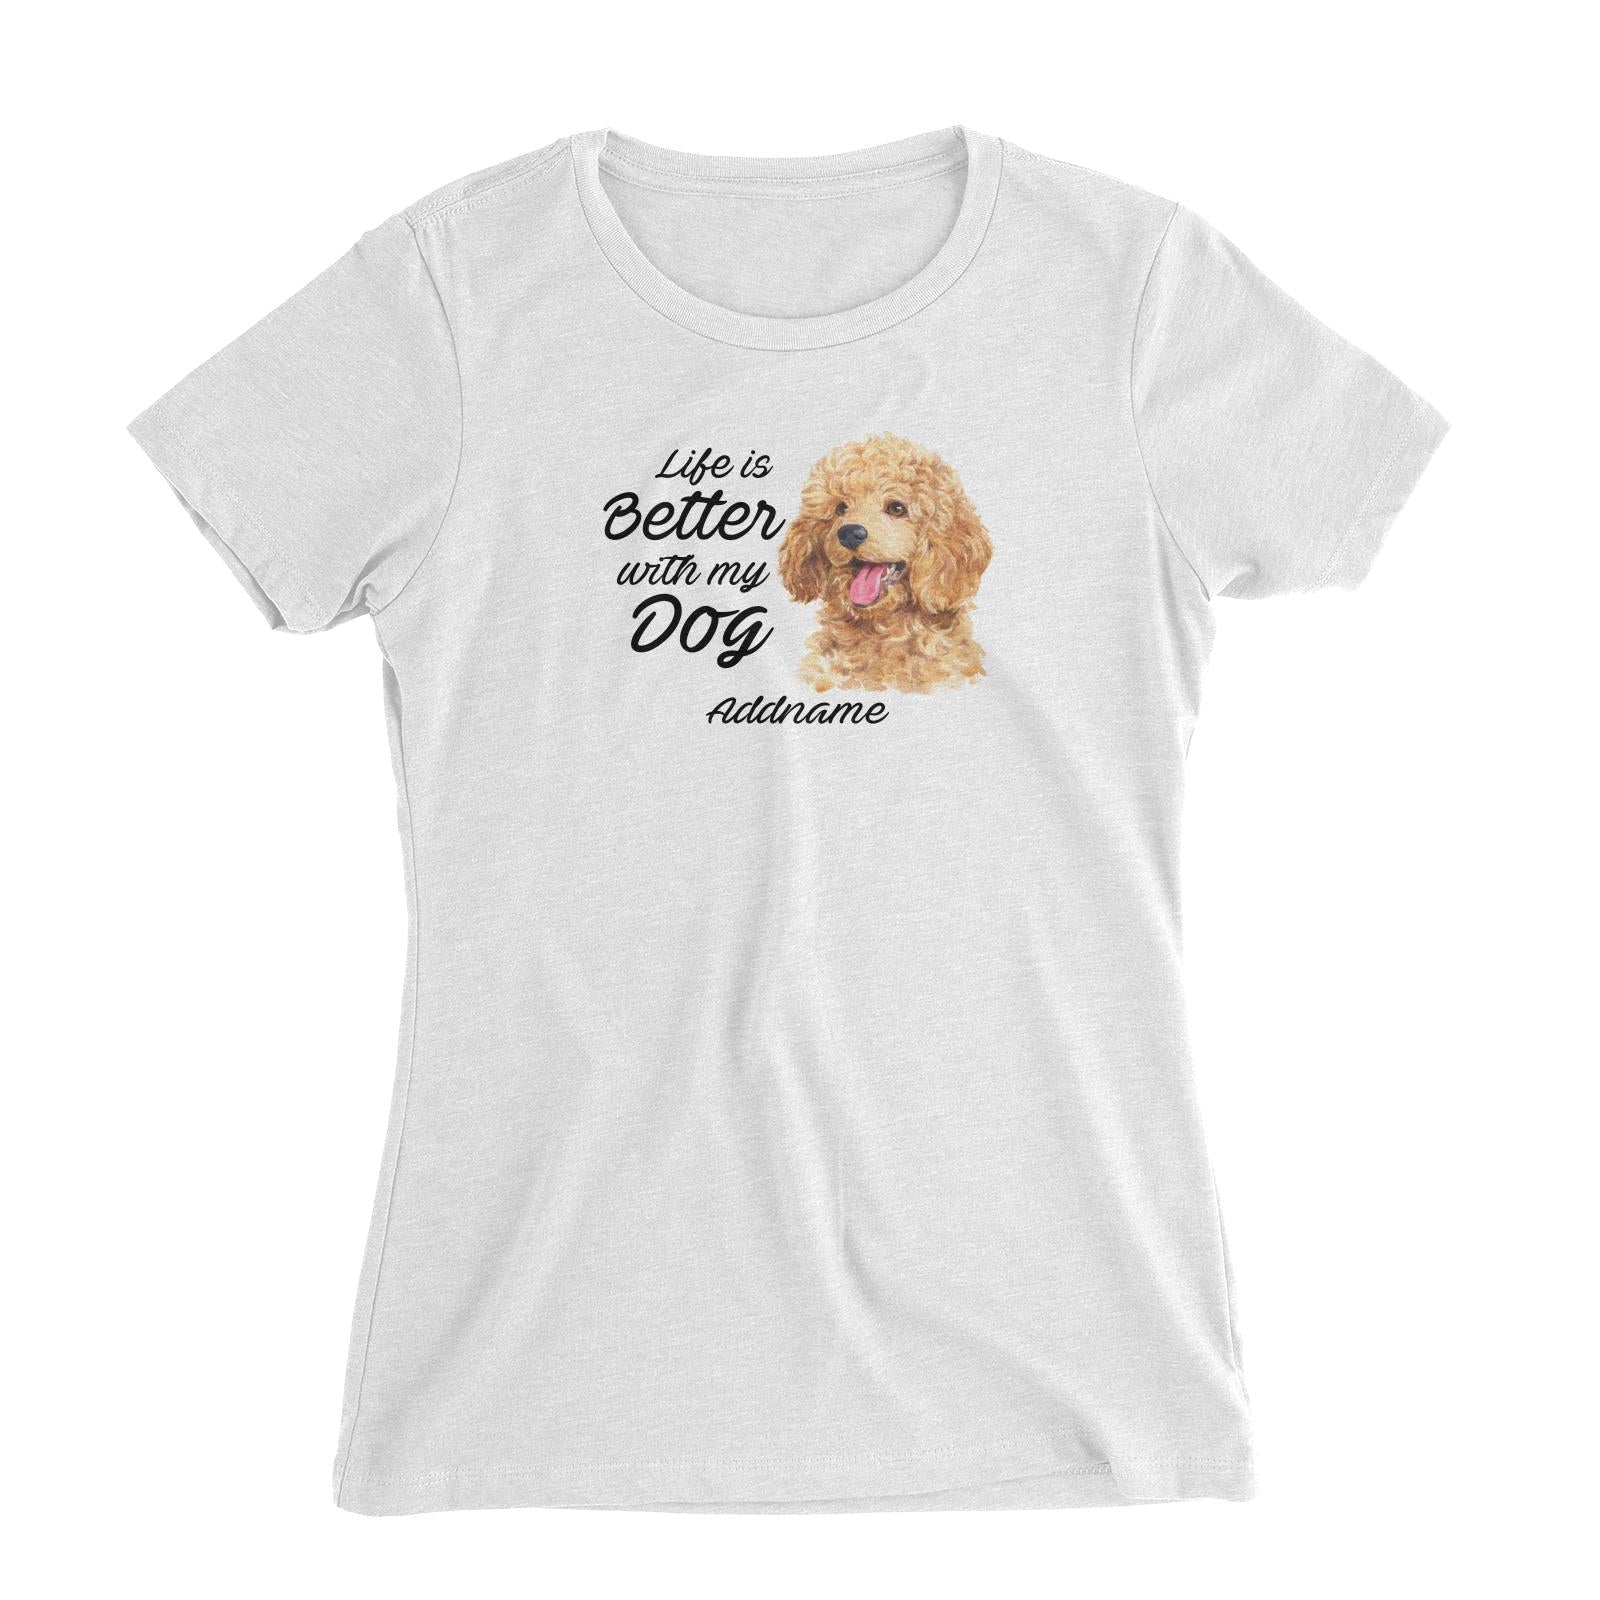 Watercolor Life is Better With My Dog Poodle Gold Addname Women's Slim Fit T-Shirt